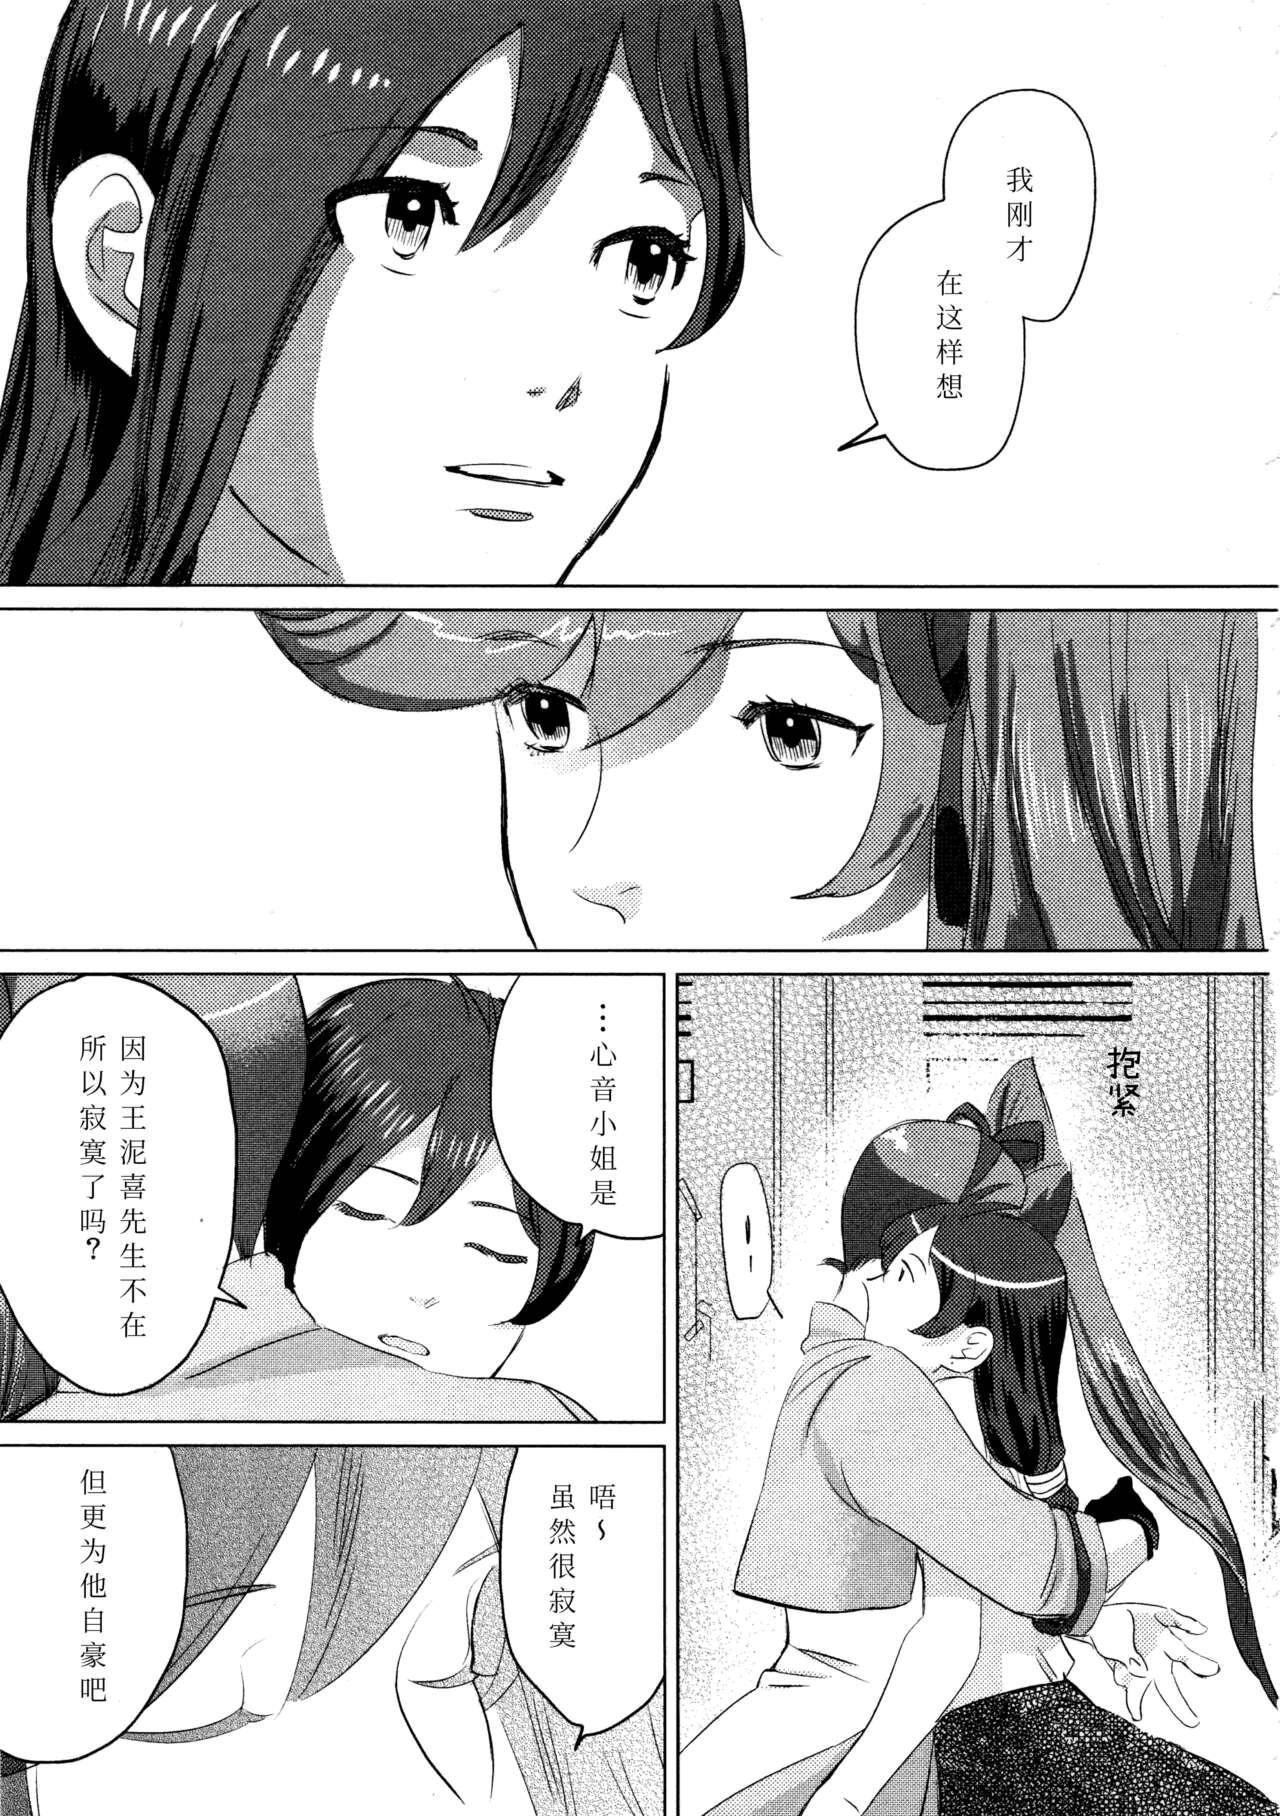 Licking Pussy Don't leave me alone,my big LITTLE brother - Ace attorney | gyakuten saiban Old - Page 6